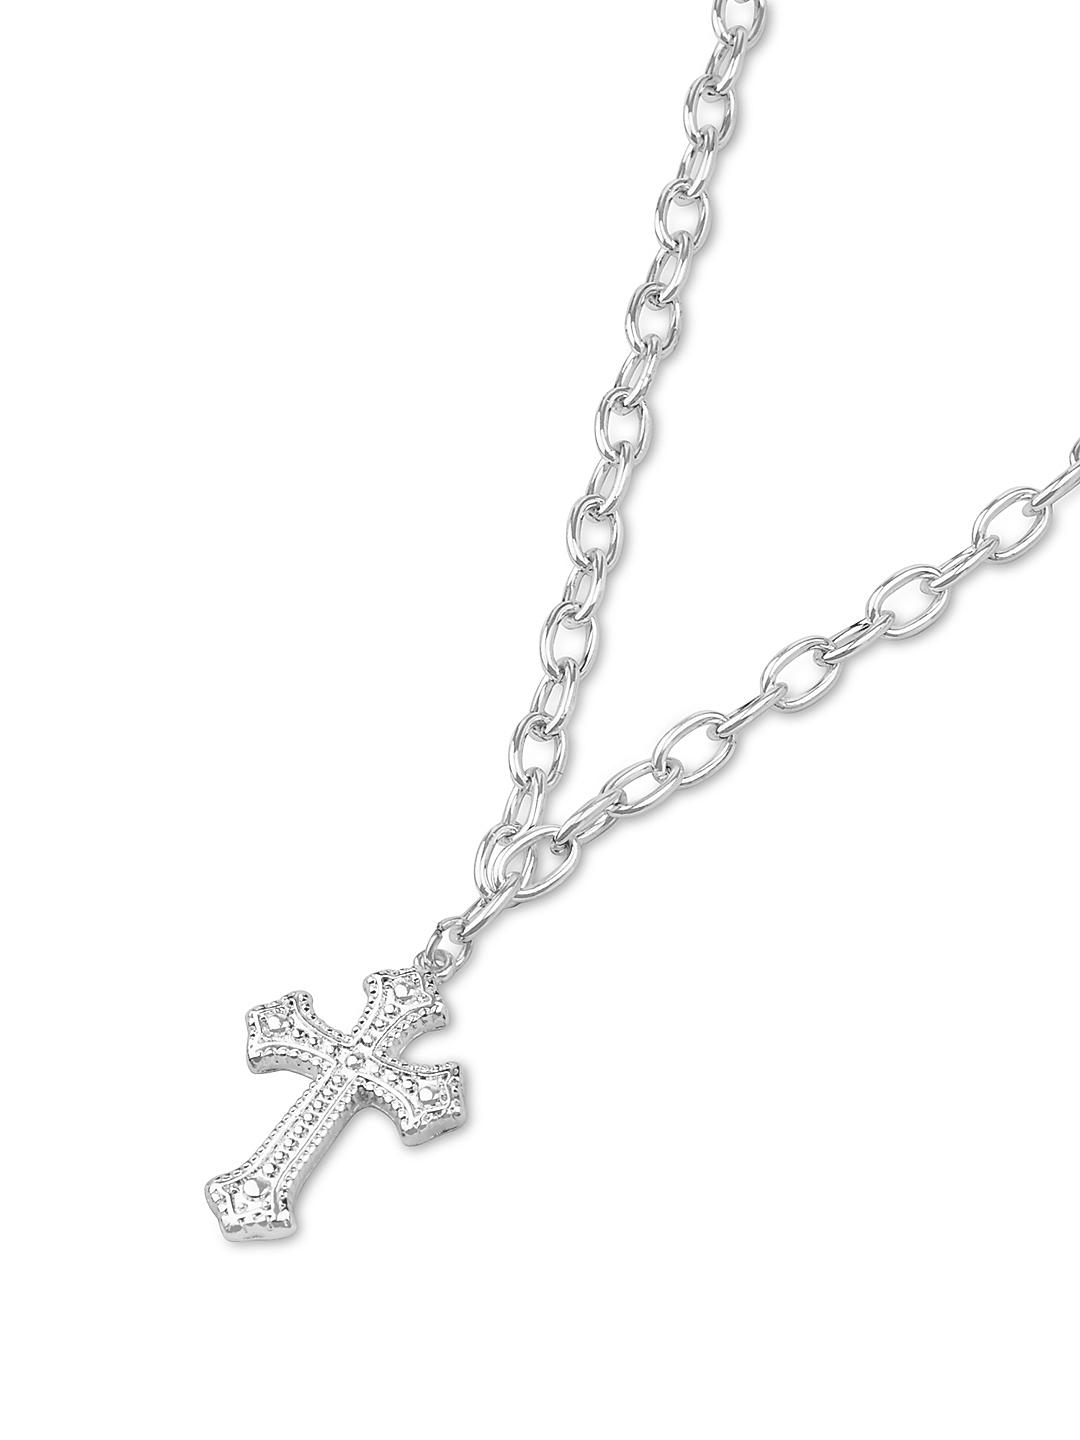 Amazon.com: Fesciory Cross Necklace for Women, 14K Gold Plated Cross Pendant  Dainty Layered Chain Necklace Jewelry Gifts for Girls (Cross(Gold)):  Clothing, Shoes & Jewelry